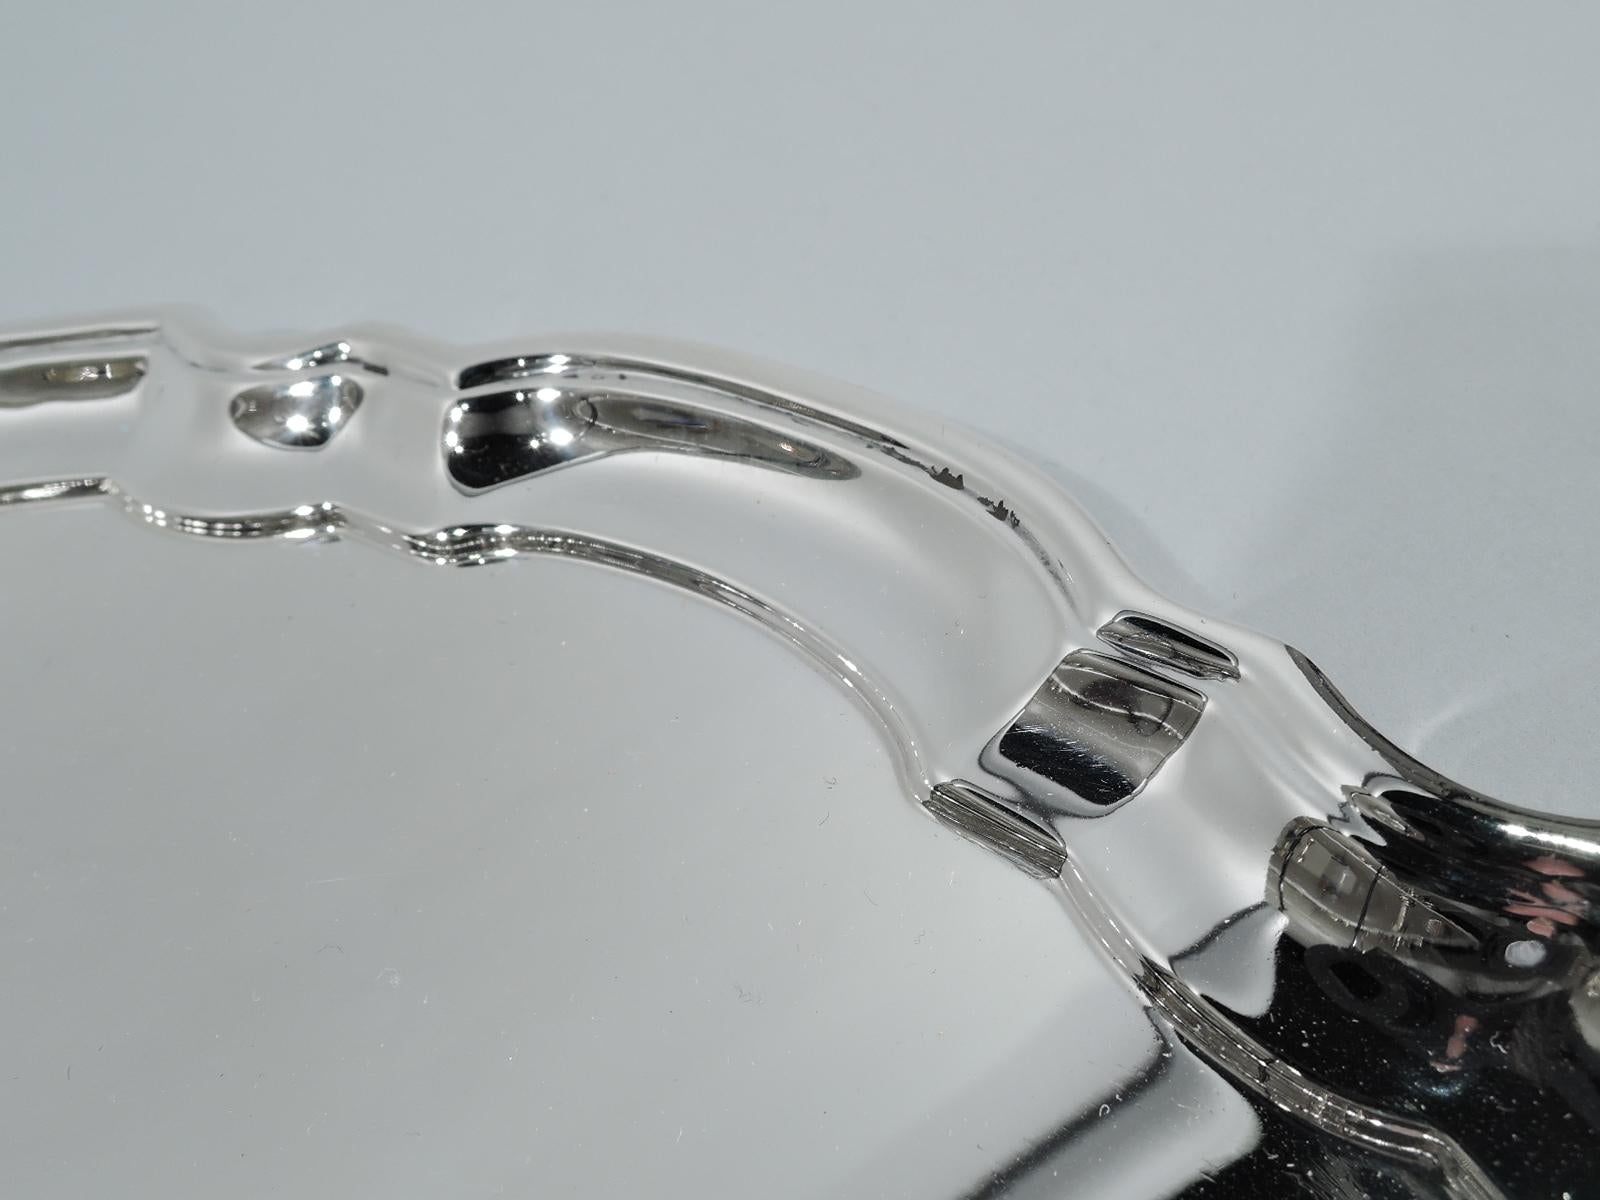 Traditional Georgian sterling silver tray. Made by Tiffany & Co. in New York, ca 1931. Round with molded curvilinear piecrust rim. Fully marked including pattern no. 21740 (first produced in 1931) and director’s letter m. Heavy weight: 21.5 troy